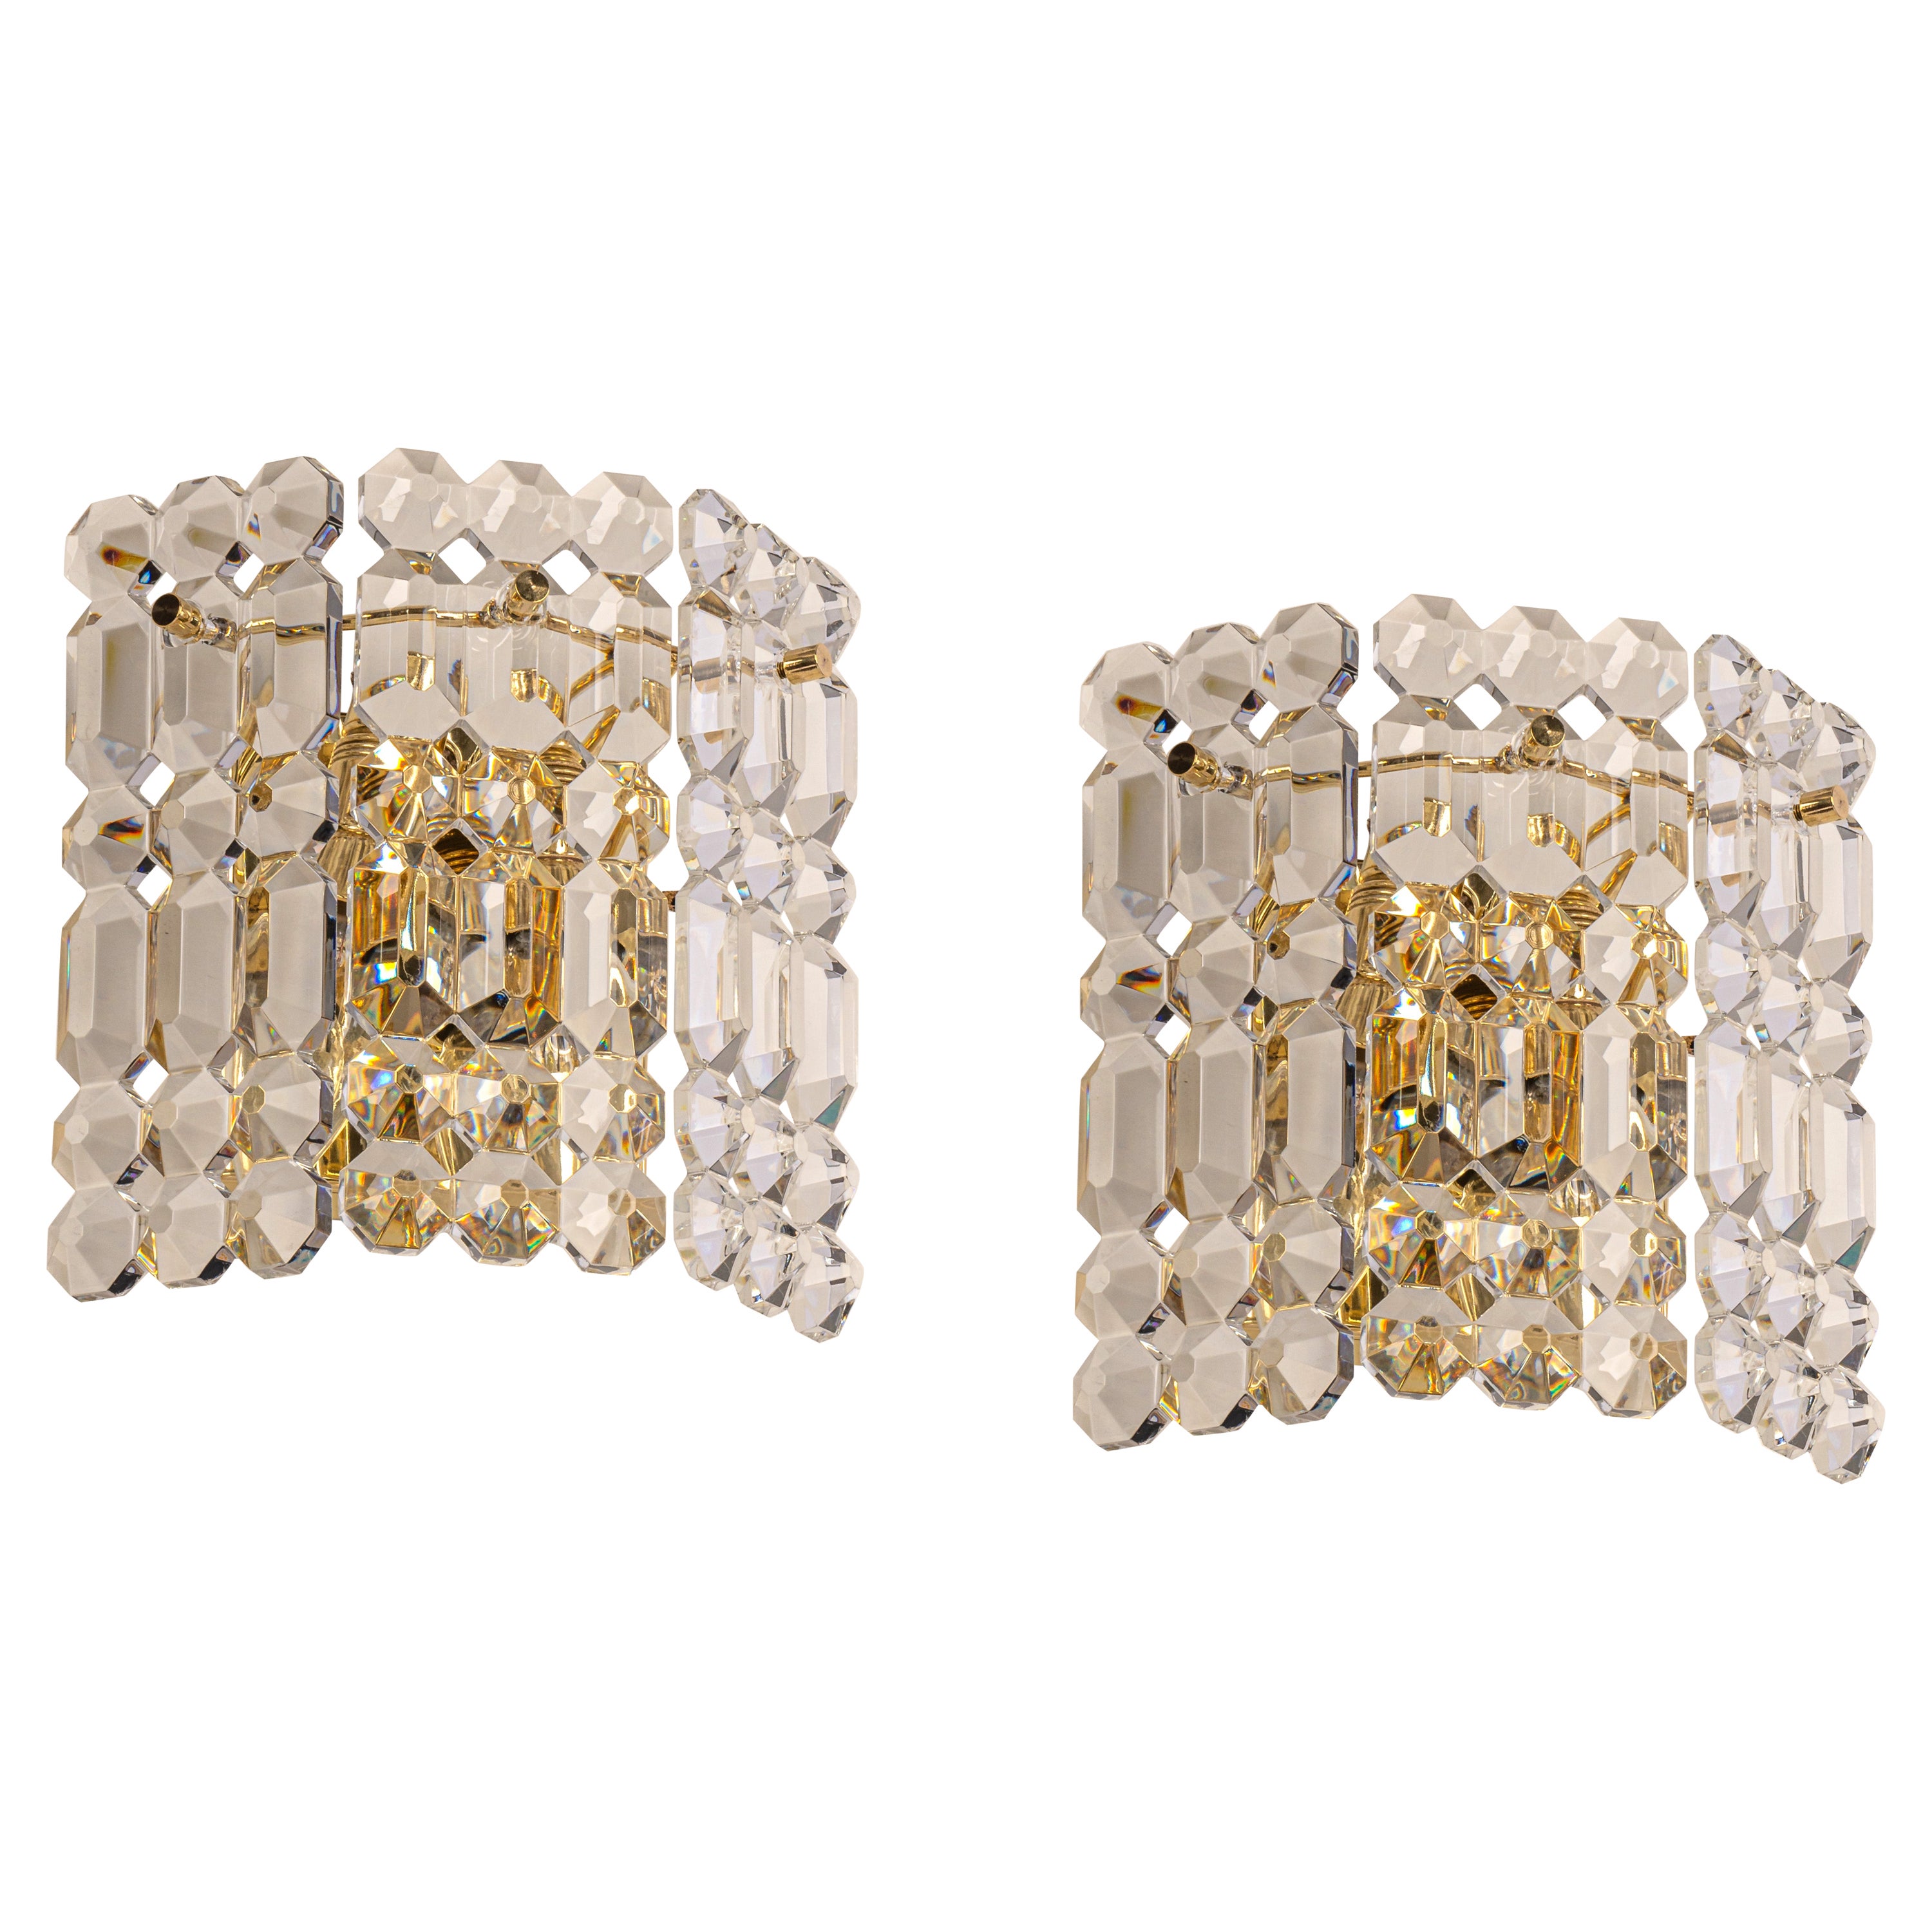 Stunning Pair of Crystal Sconces by Kinkeldey, Germany, 1970s For Sale